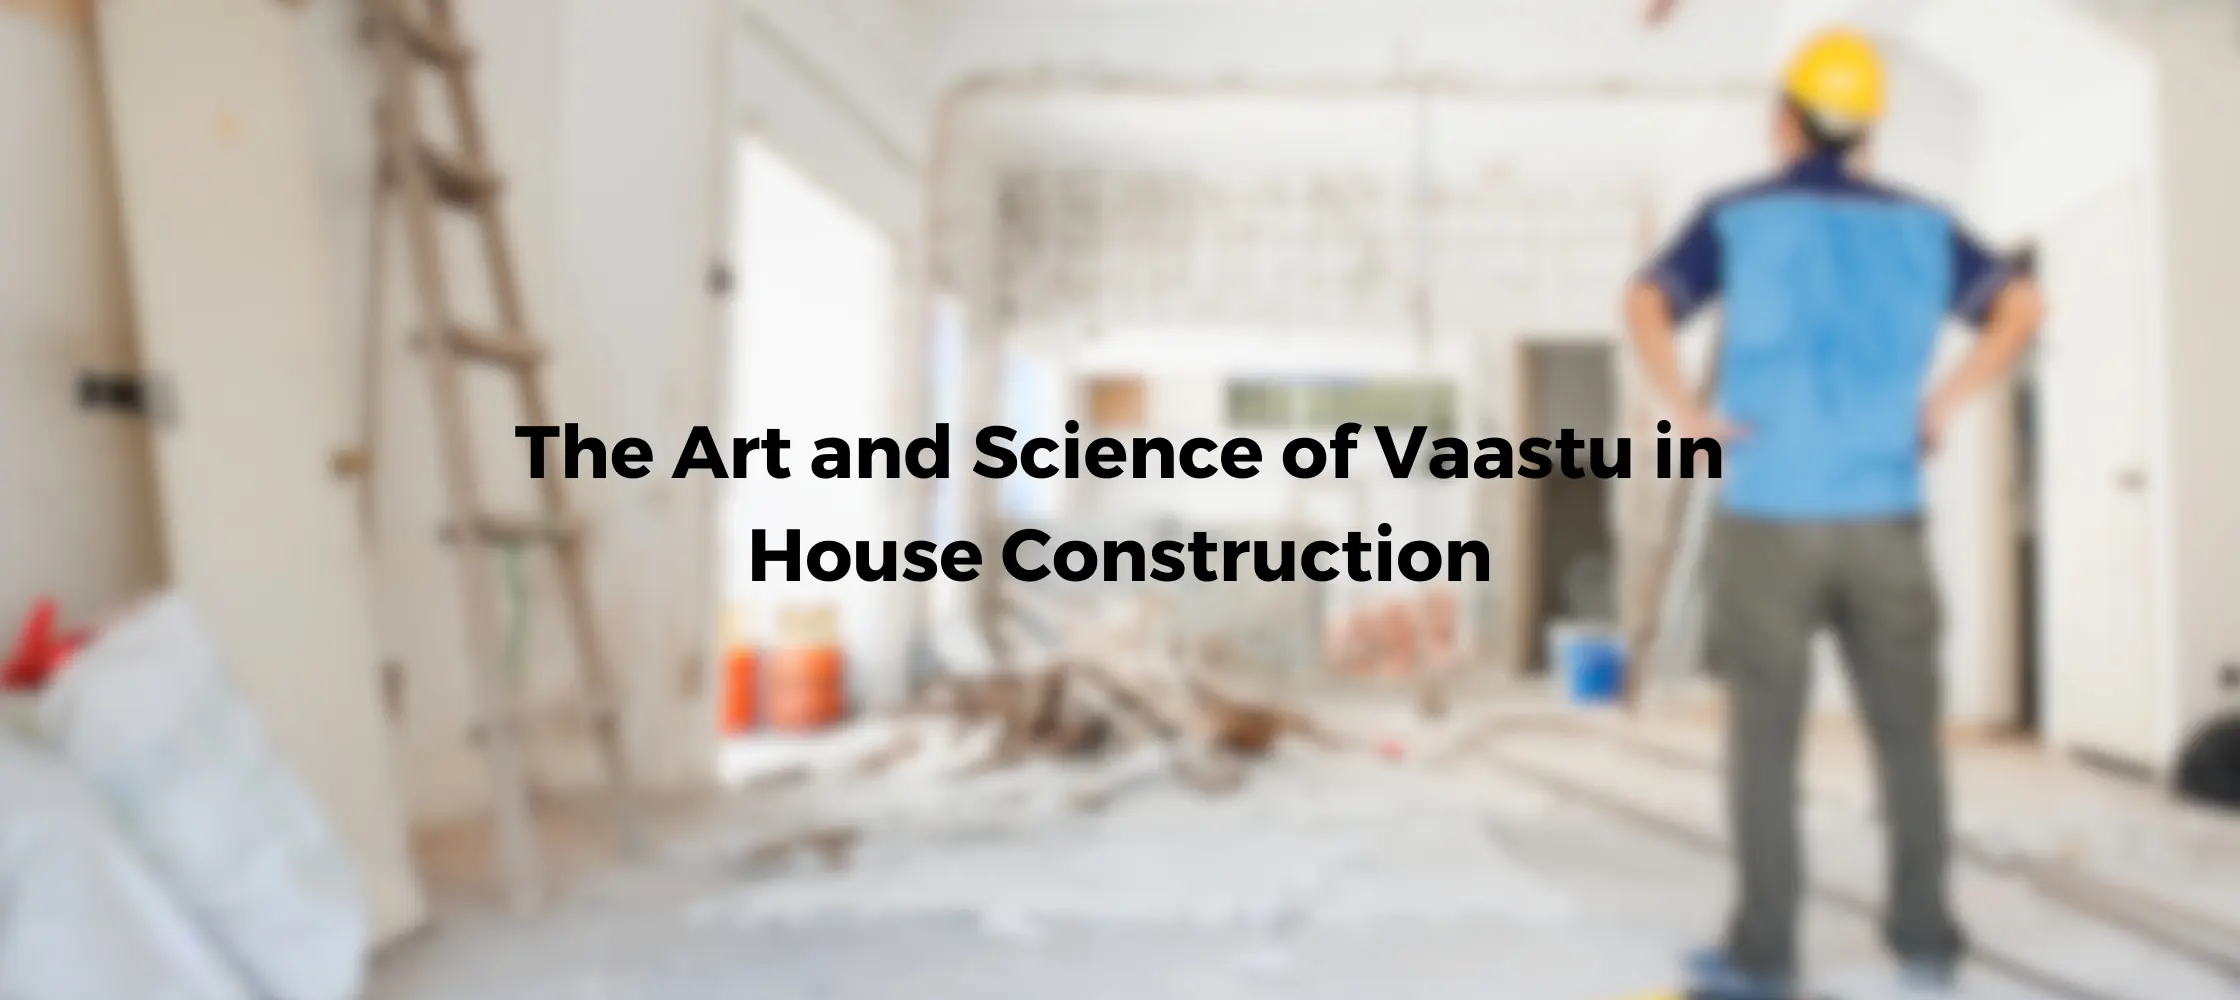 The Art and Science of Vaastu in House Construction